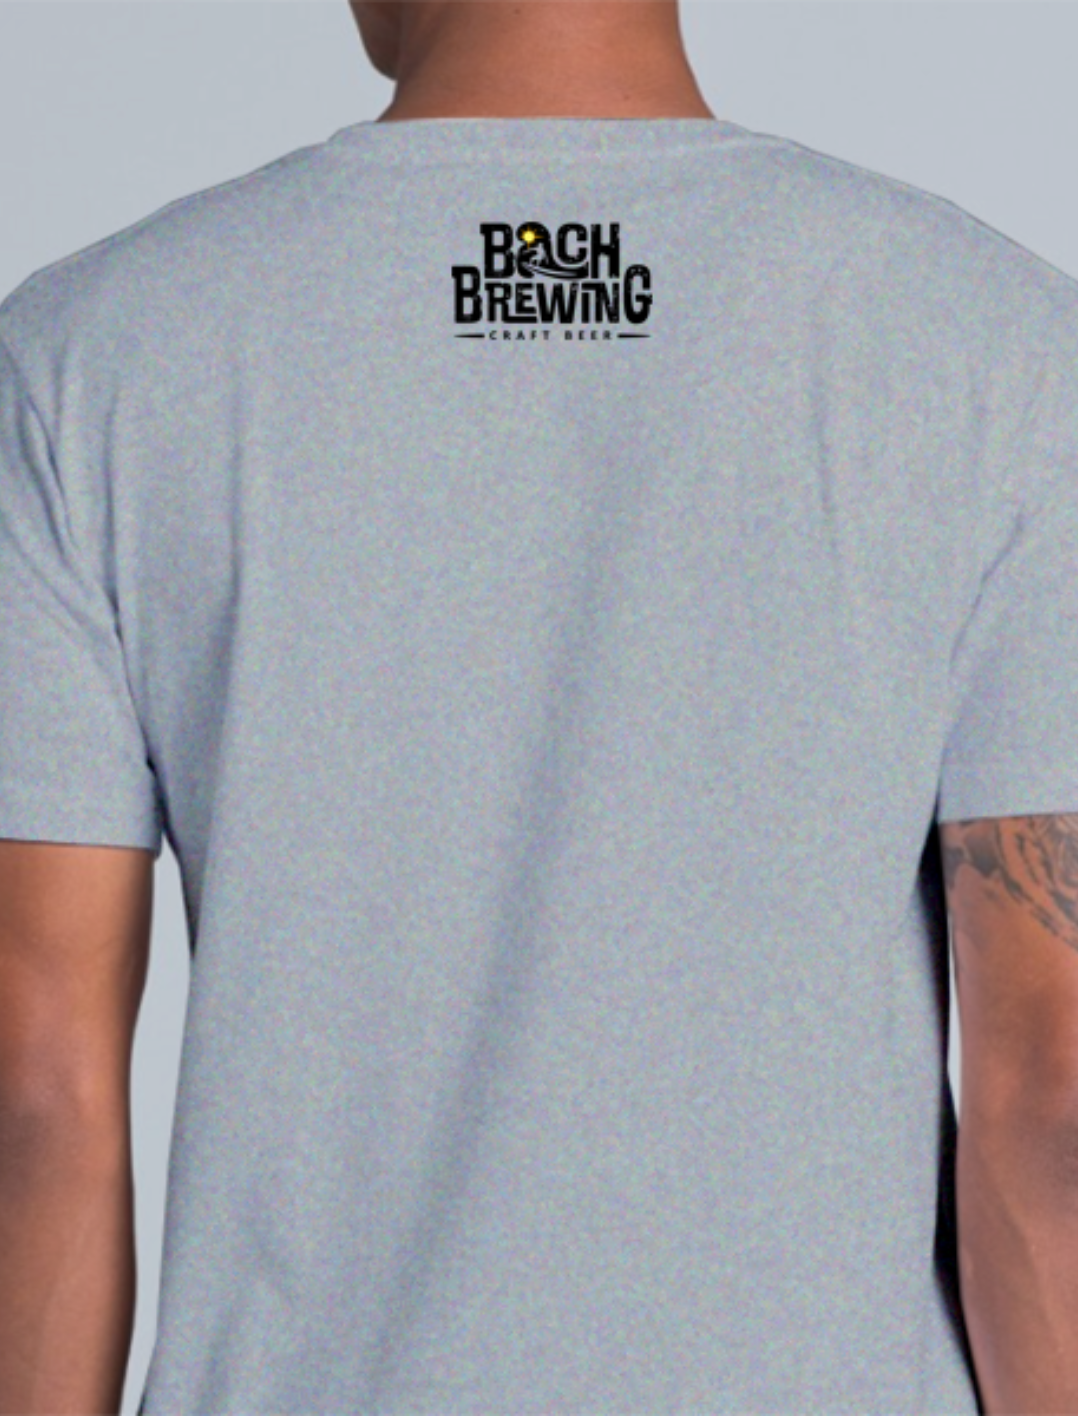 Bach Brewing Mens T-shirt - Surf Motorbike (front graphic)